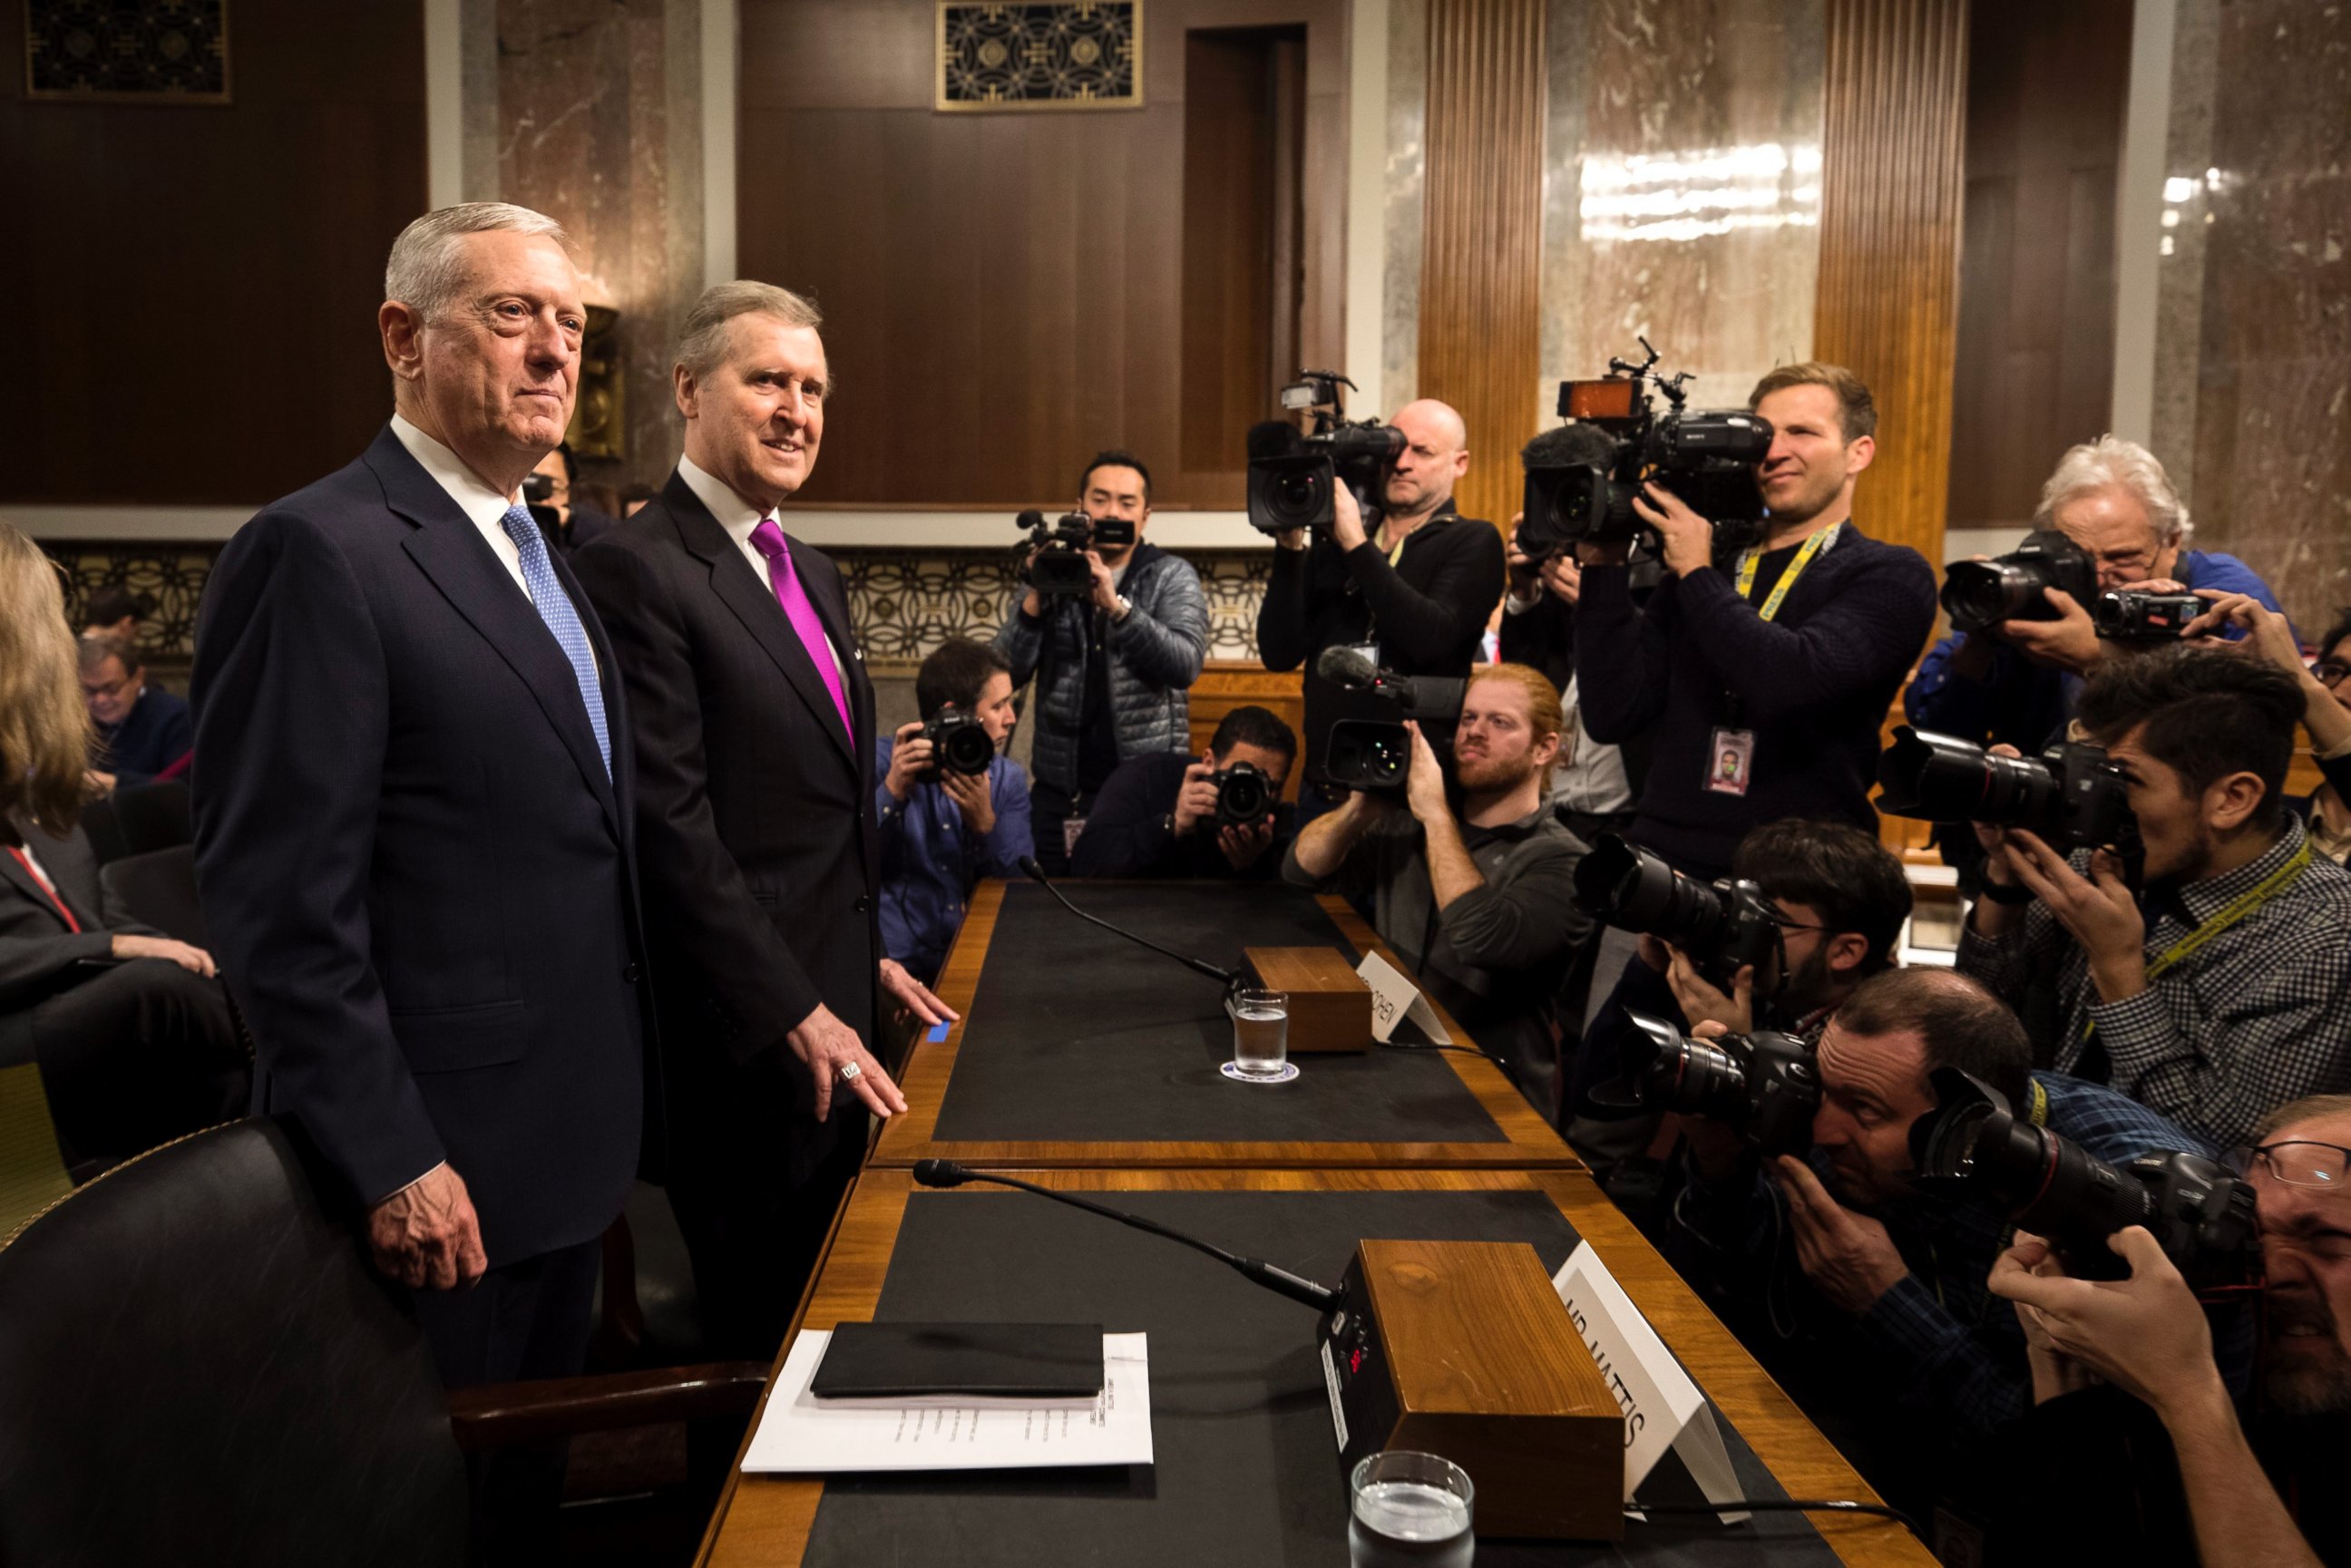 PHOTO: Retired United States Marine Corps general and Donald Trump's nominee for Secretary of Defense James Mattis, stands next to former Secretary of Defense William Cohen in Washington, Jan. 12, 2017.